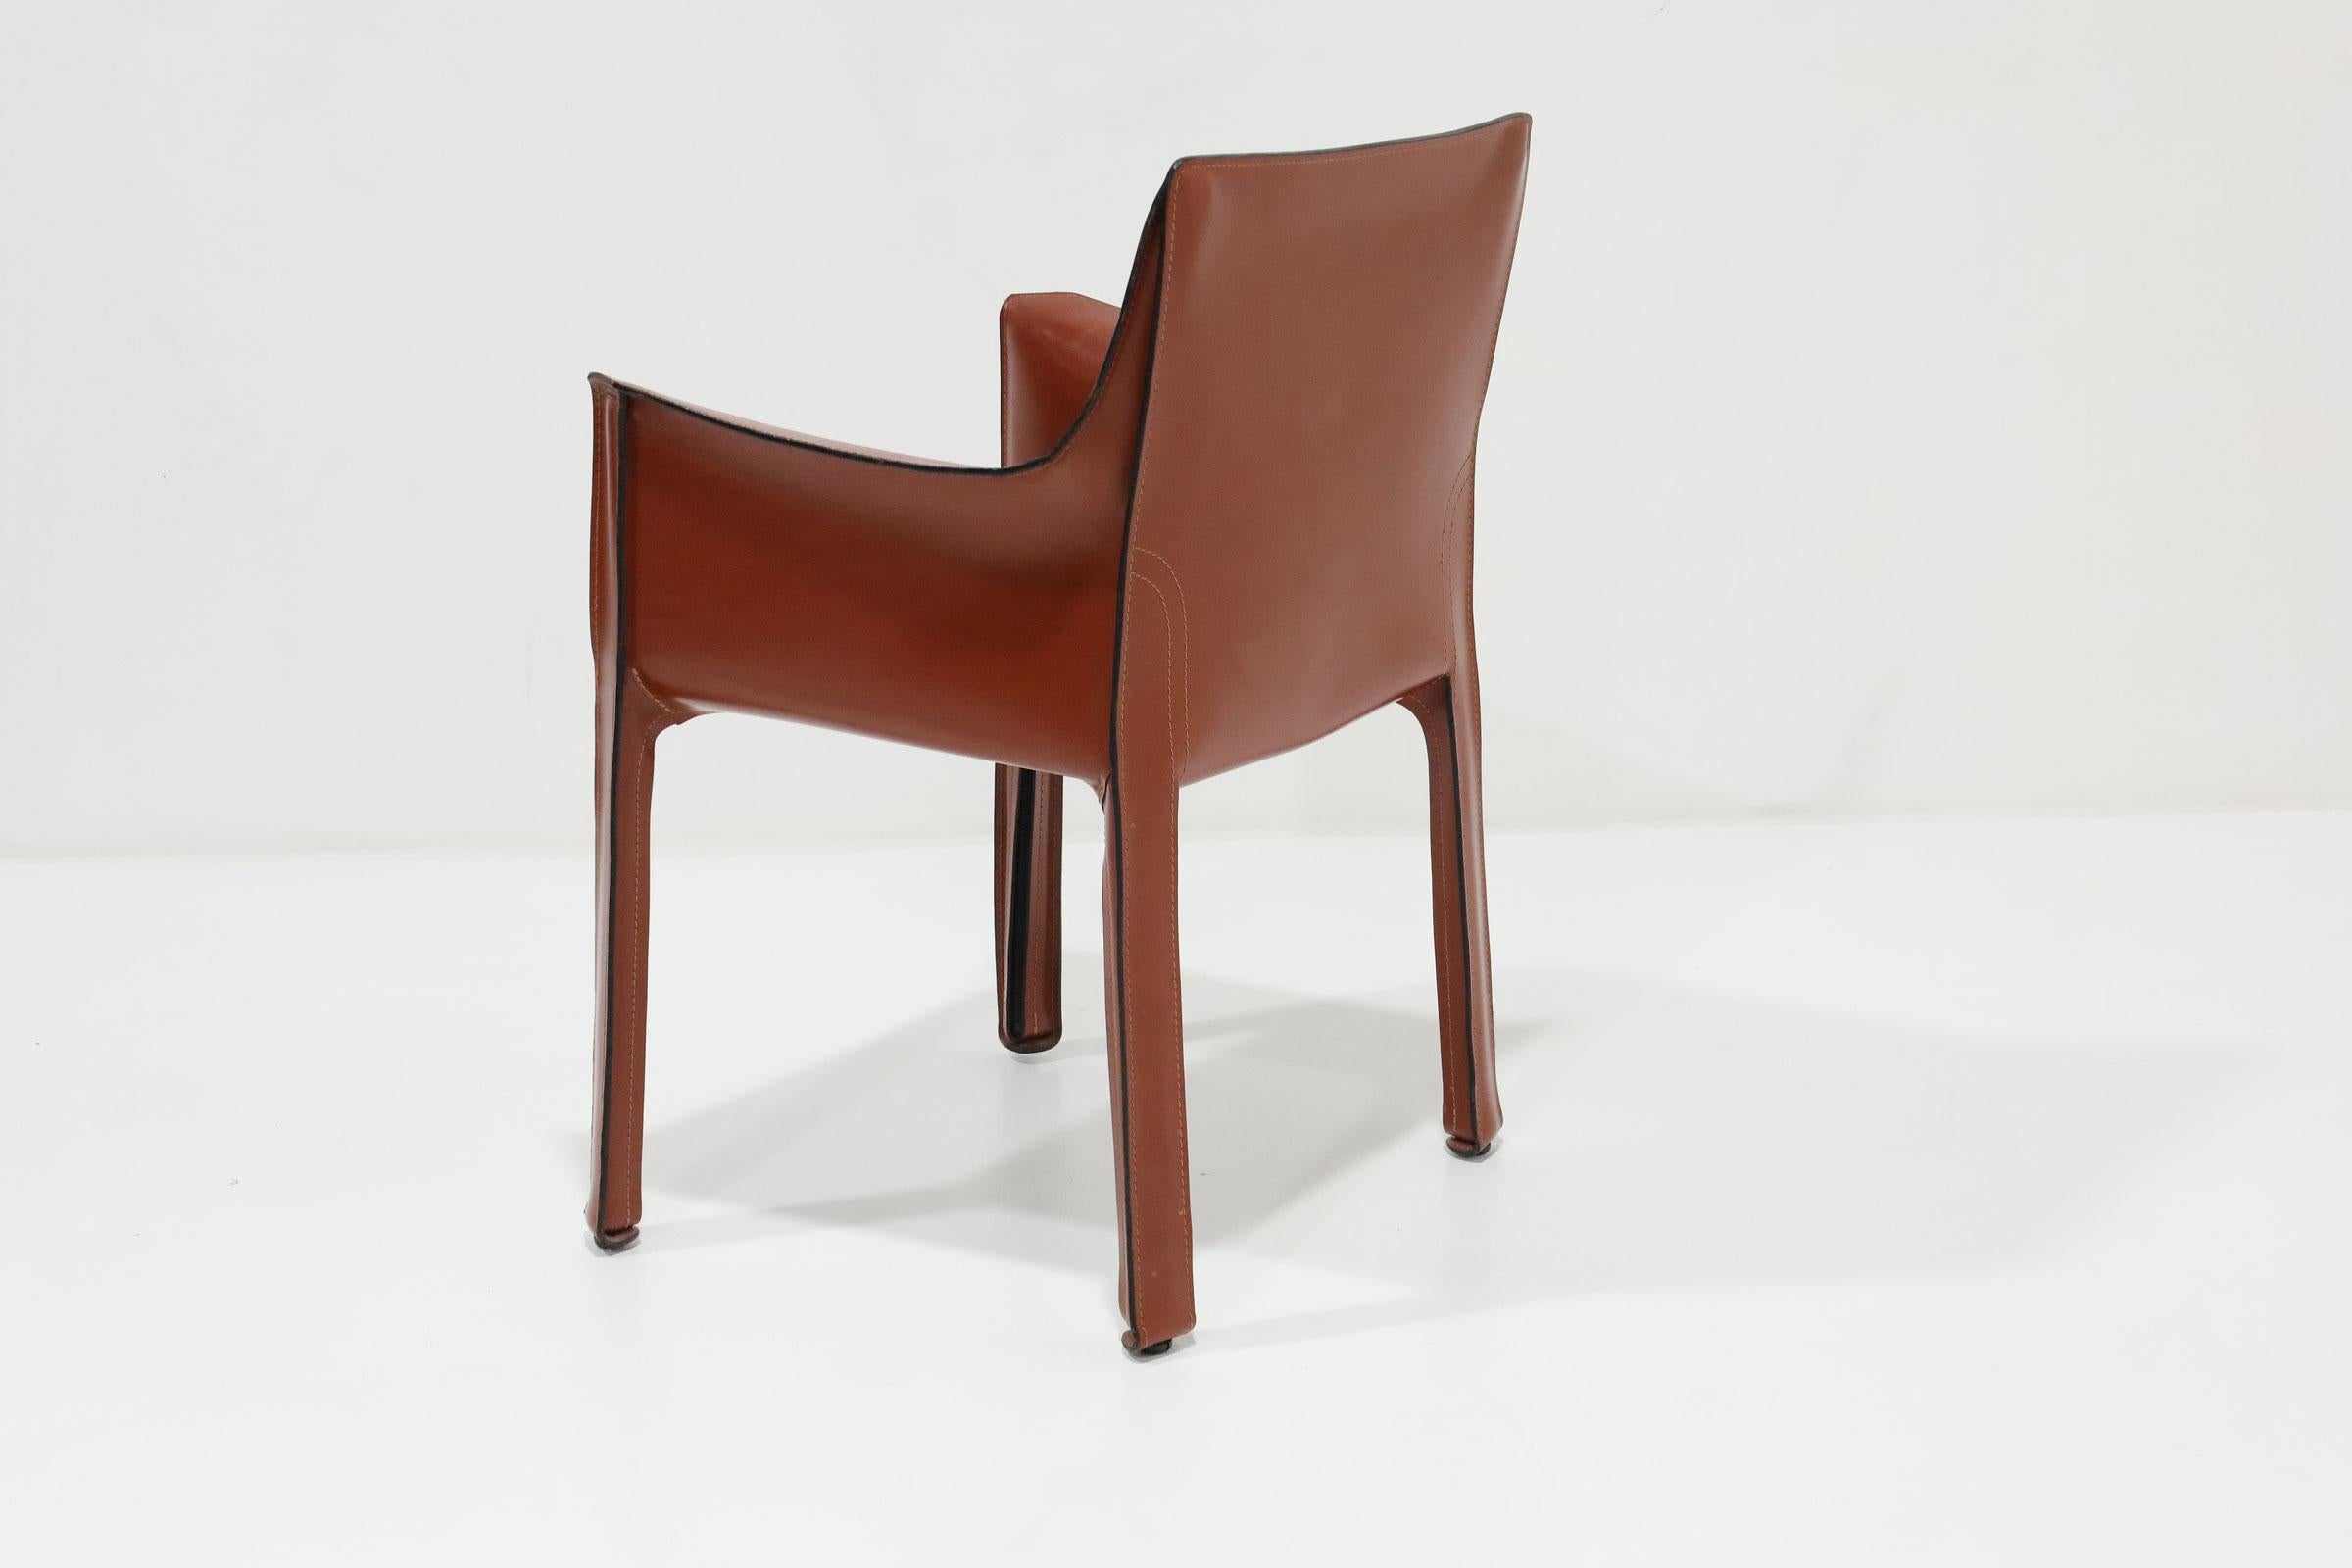 Mario Bellini for Cassina model 'CAB 413', leather, Italy, designed in 1979

The iconic ‘CAB’ chairs were designed by Mario Bellini in 1979. Conceptually new was the way Bellini uses leather to cover the whole chair in one monochrome layer. The red